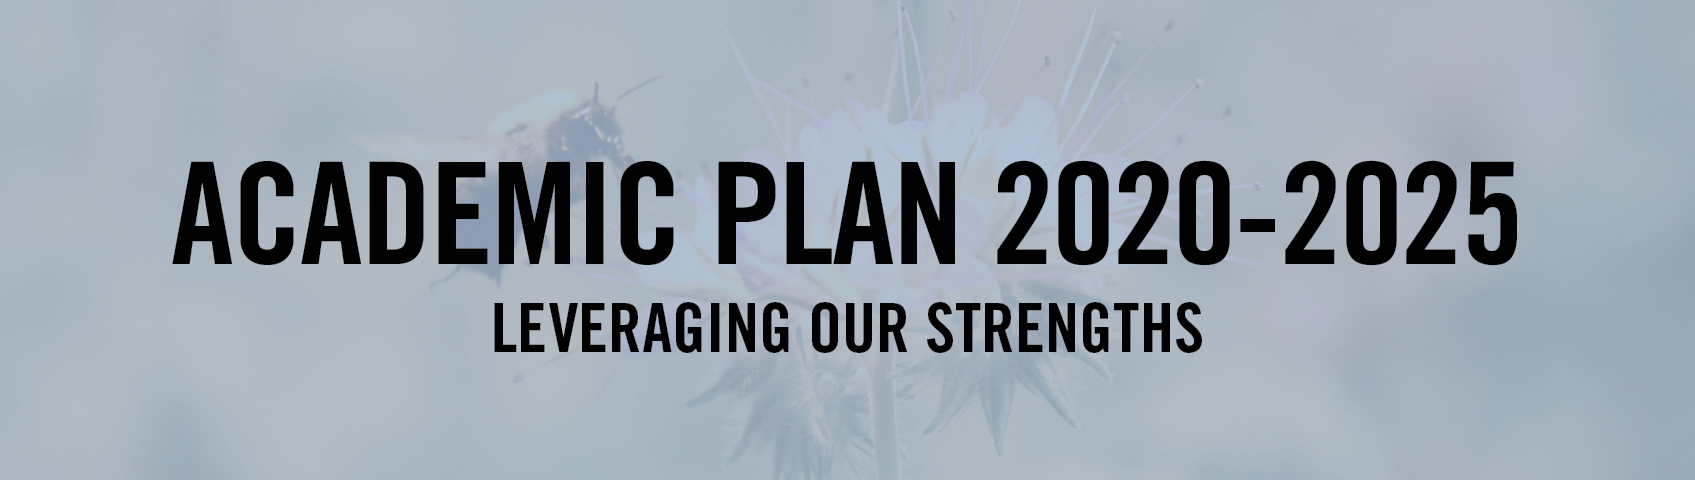 Academic Plan 2025 - Leveraging Our Strengths